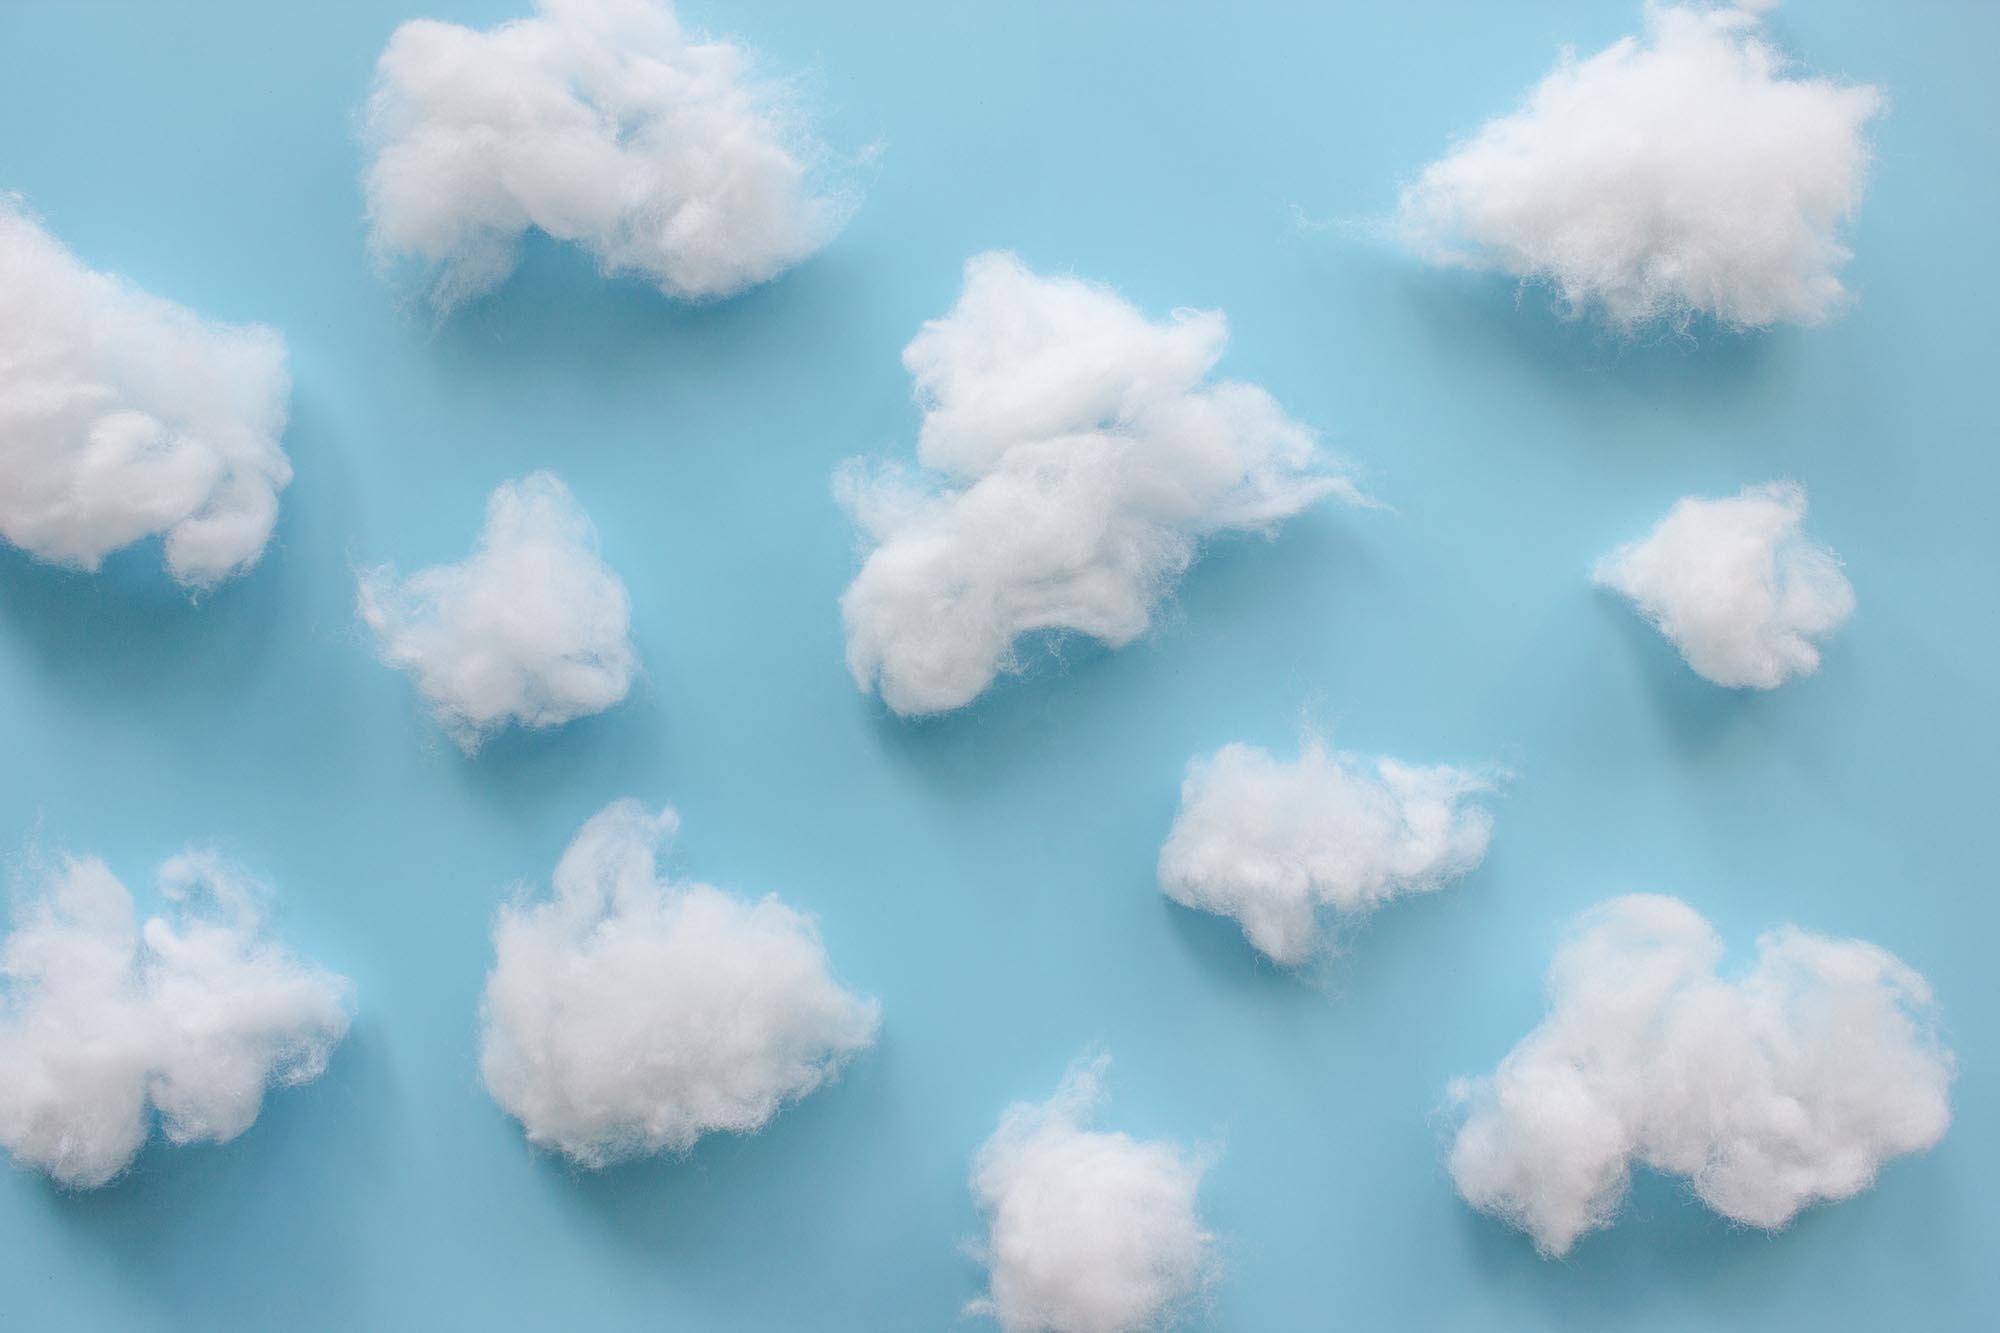 Cotton wool clouds on light blue background